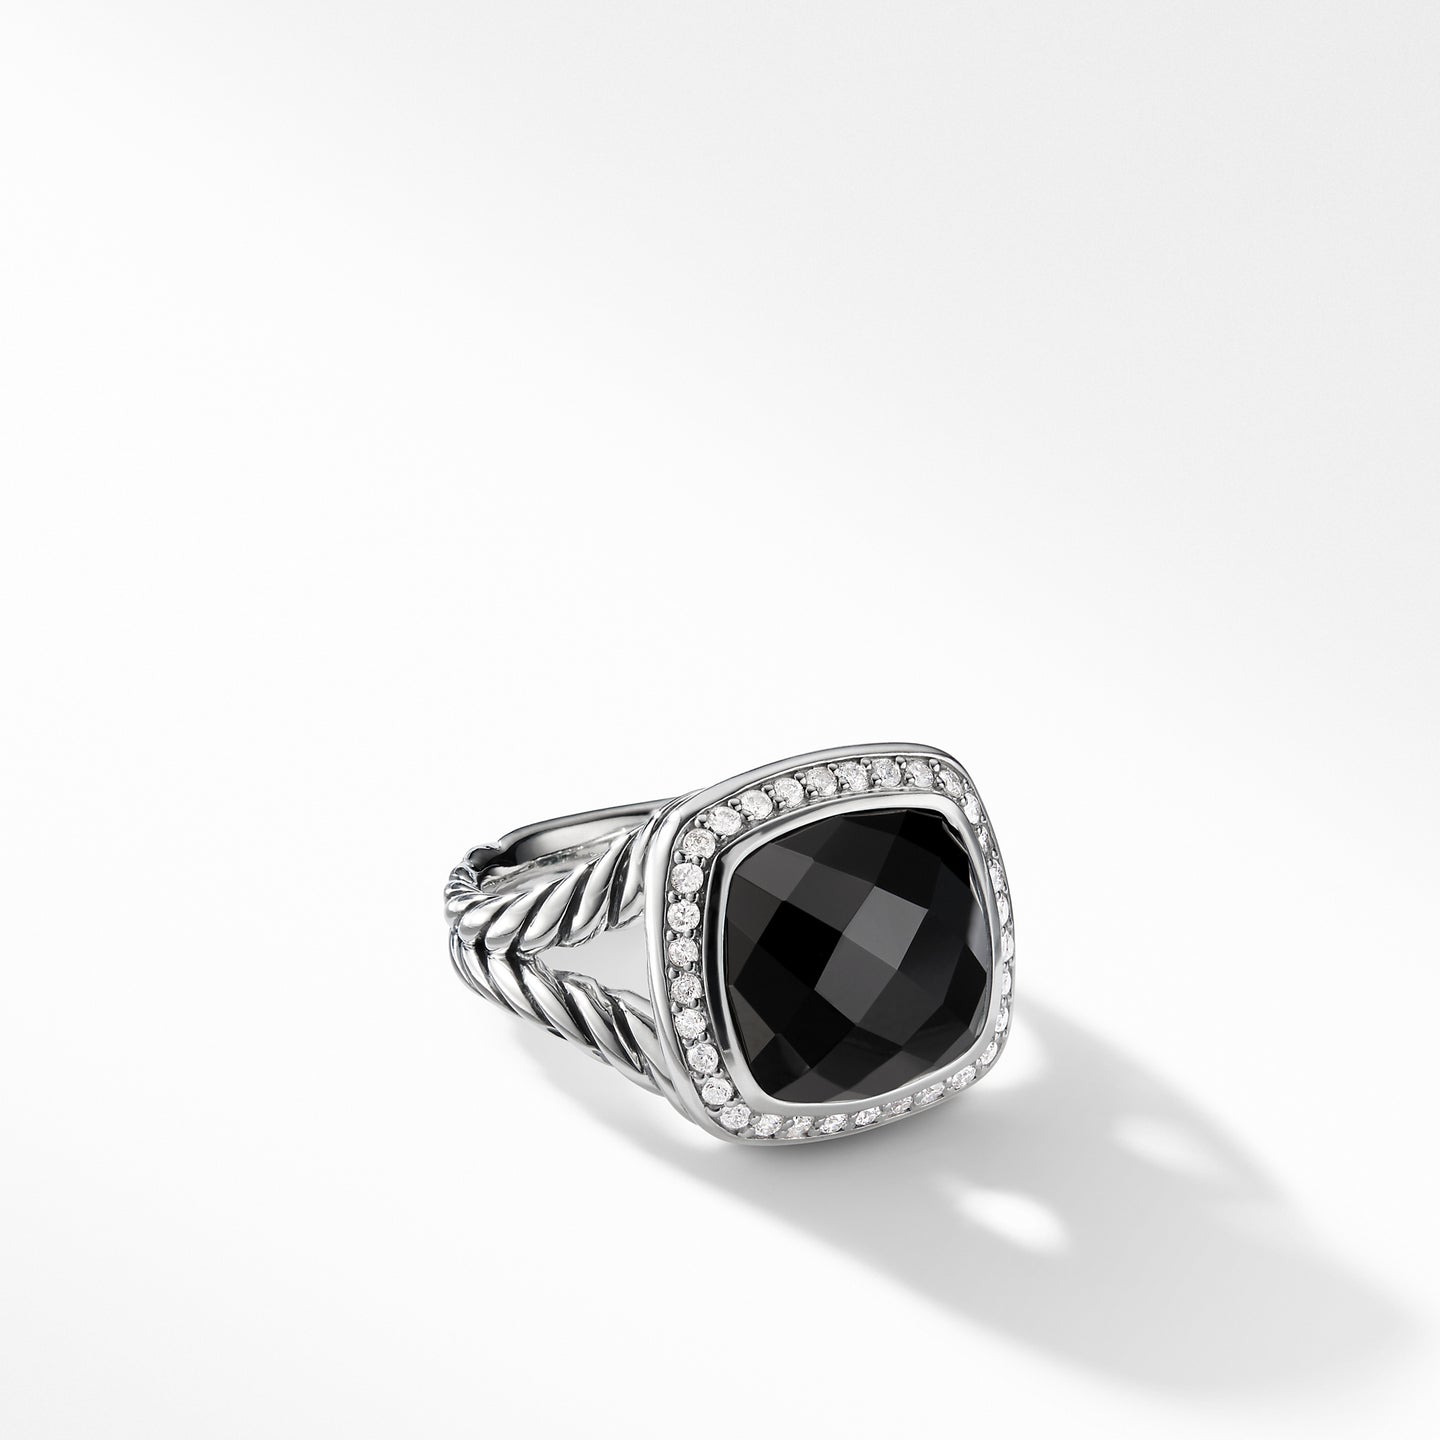 Ring with Black Onyx and Diamonds, Size 7